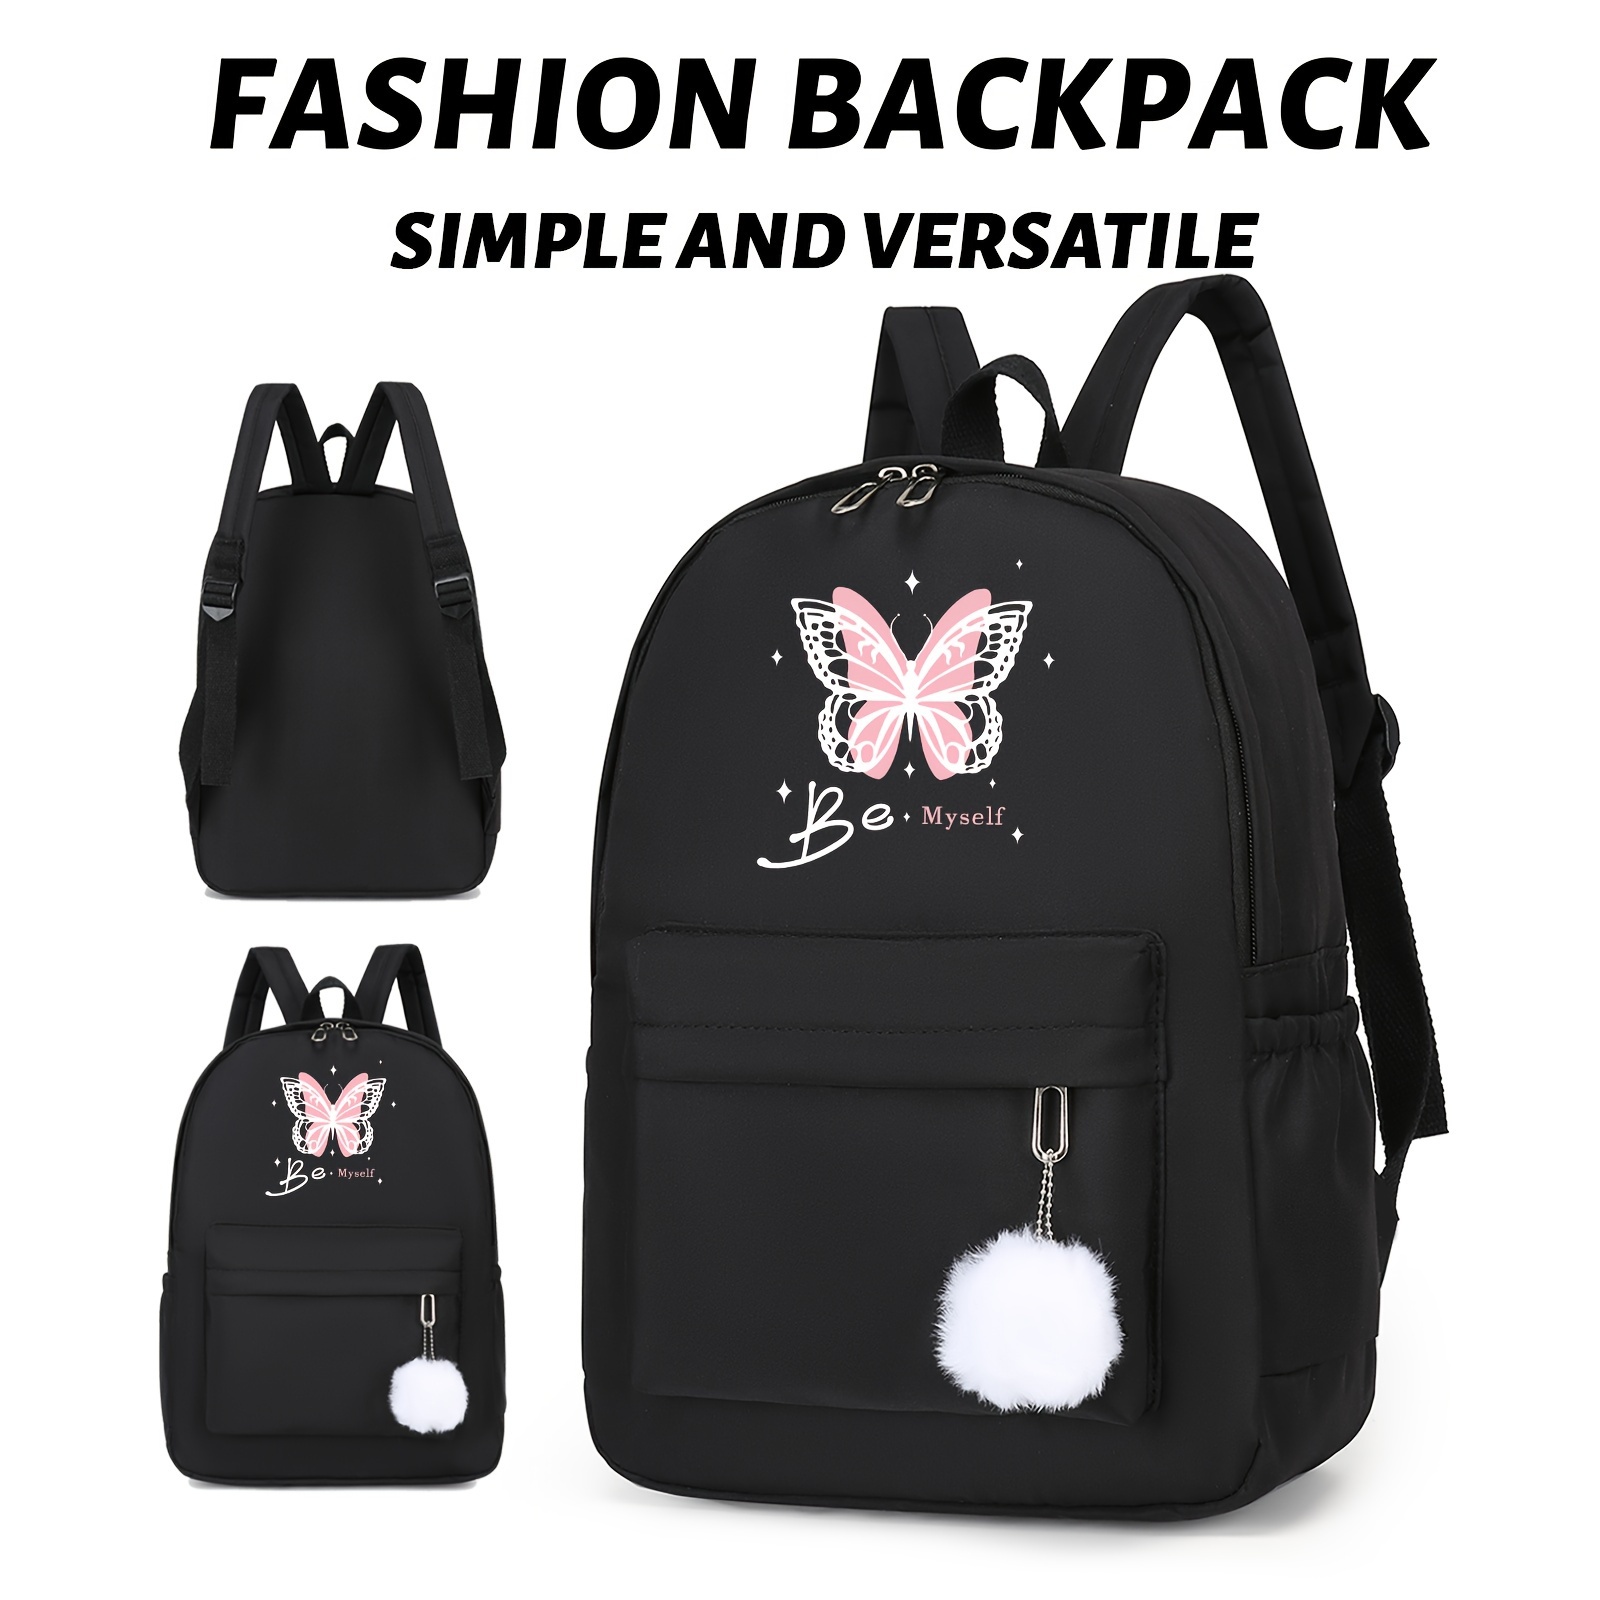 

Simple Versatile Butterfly Pattern Casual Backpack, Stylish And Versatile Black Backpack, Suitable For Travel, Large Capacity, Suitable For Men And Women, Multi Functional Schoolbag